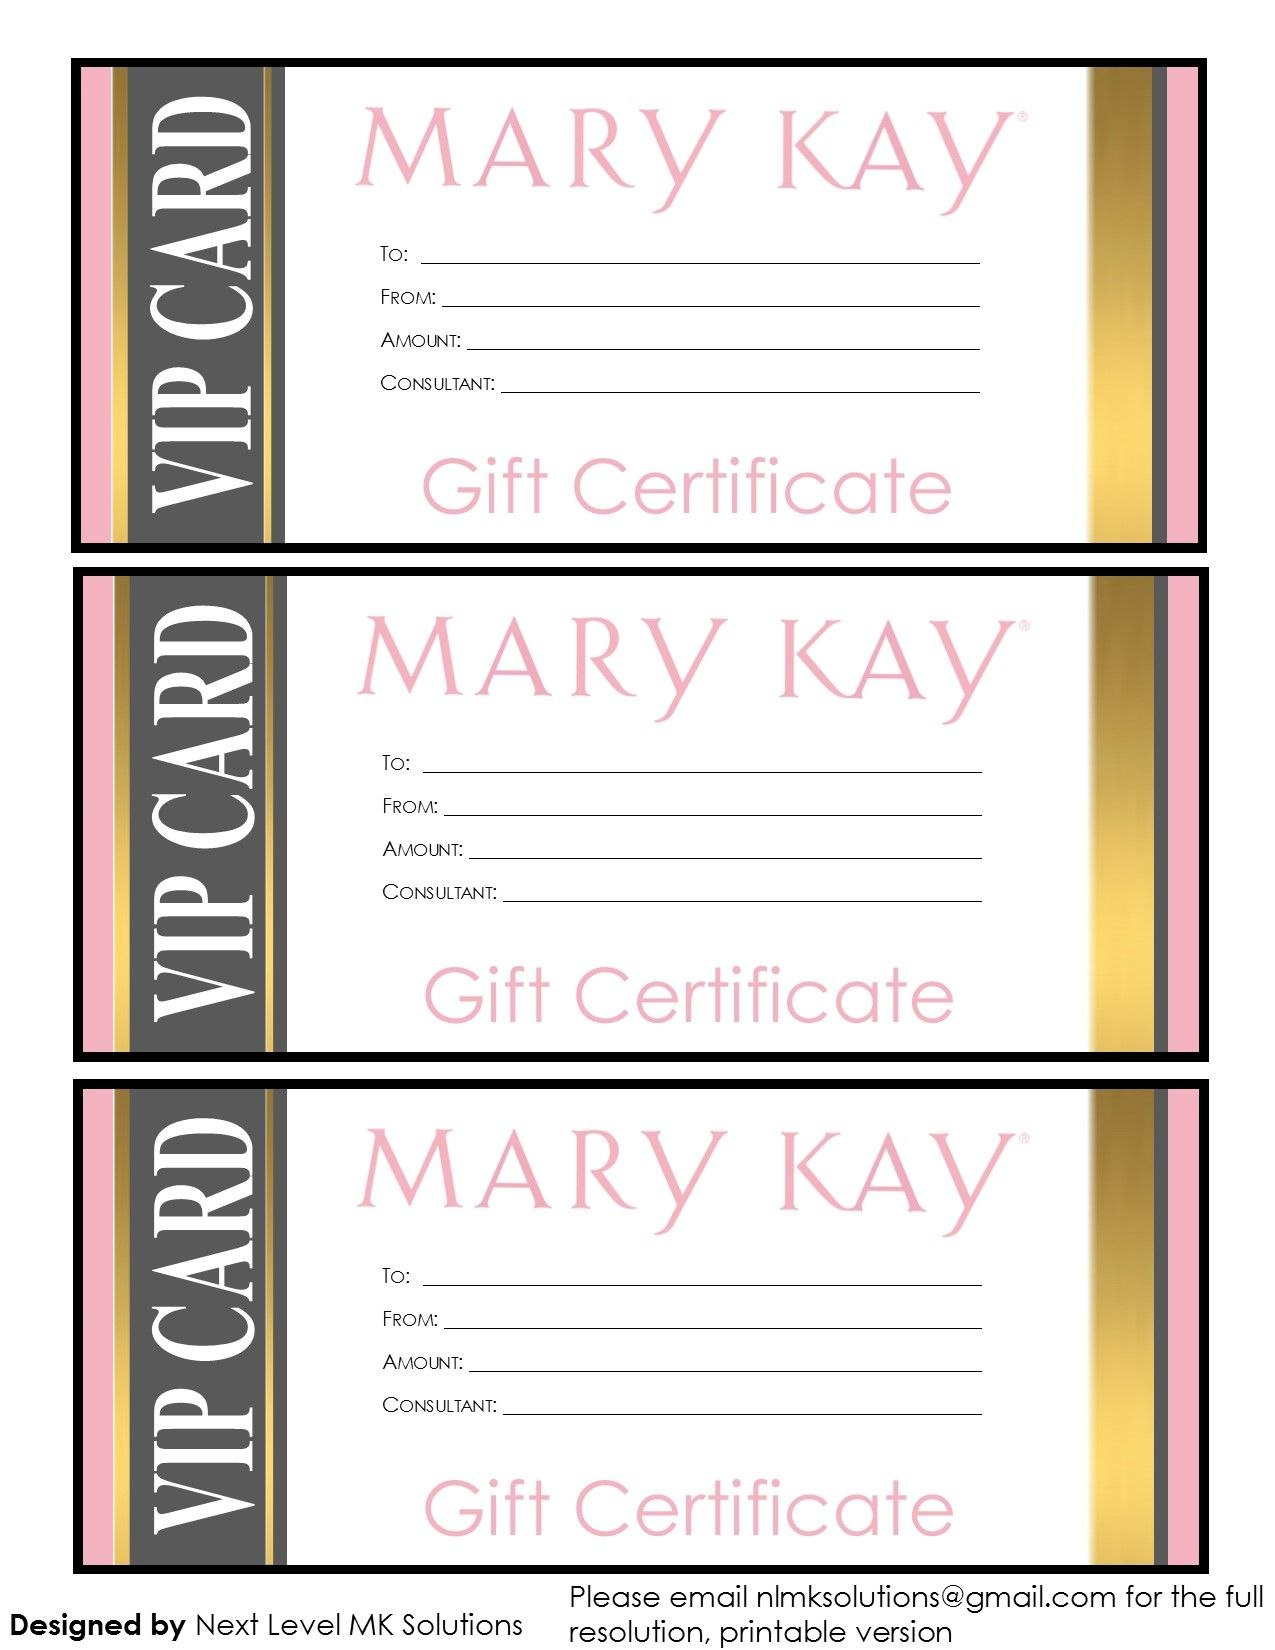 Mary Kay Gift Certificates  Please Email For The Full Pdf Printable within Mary Kay Gift Certificate Template